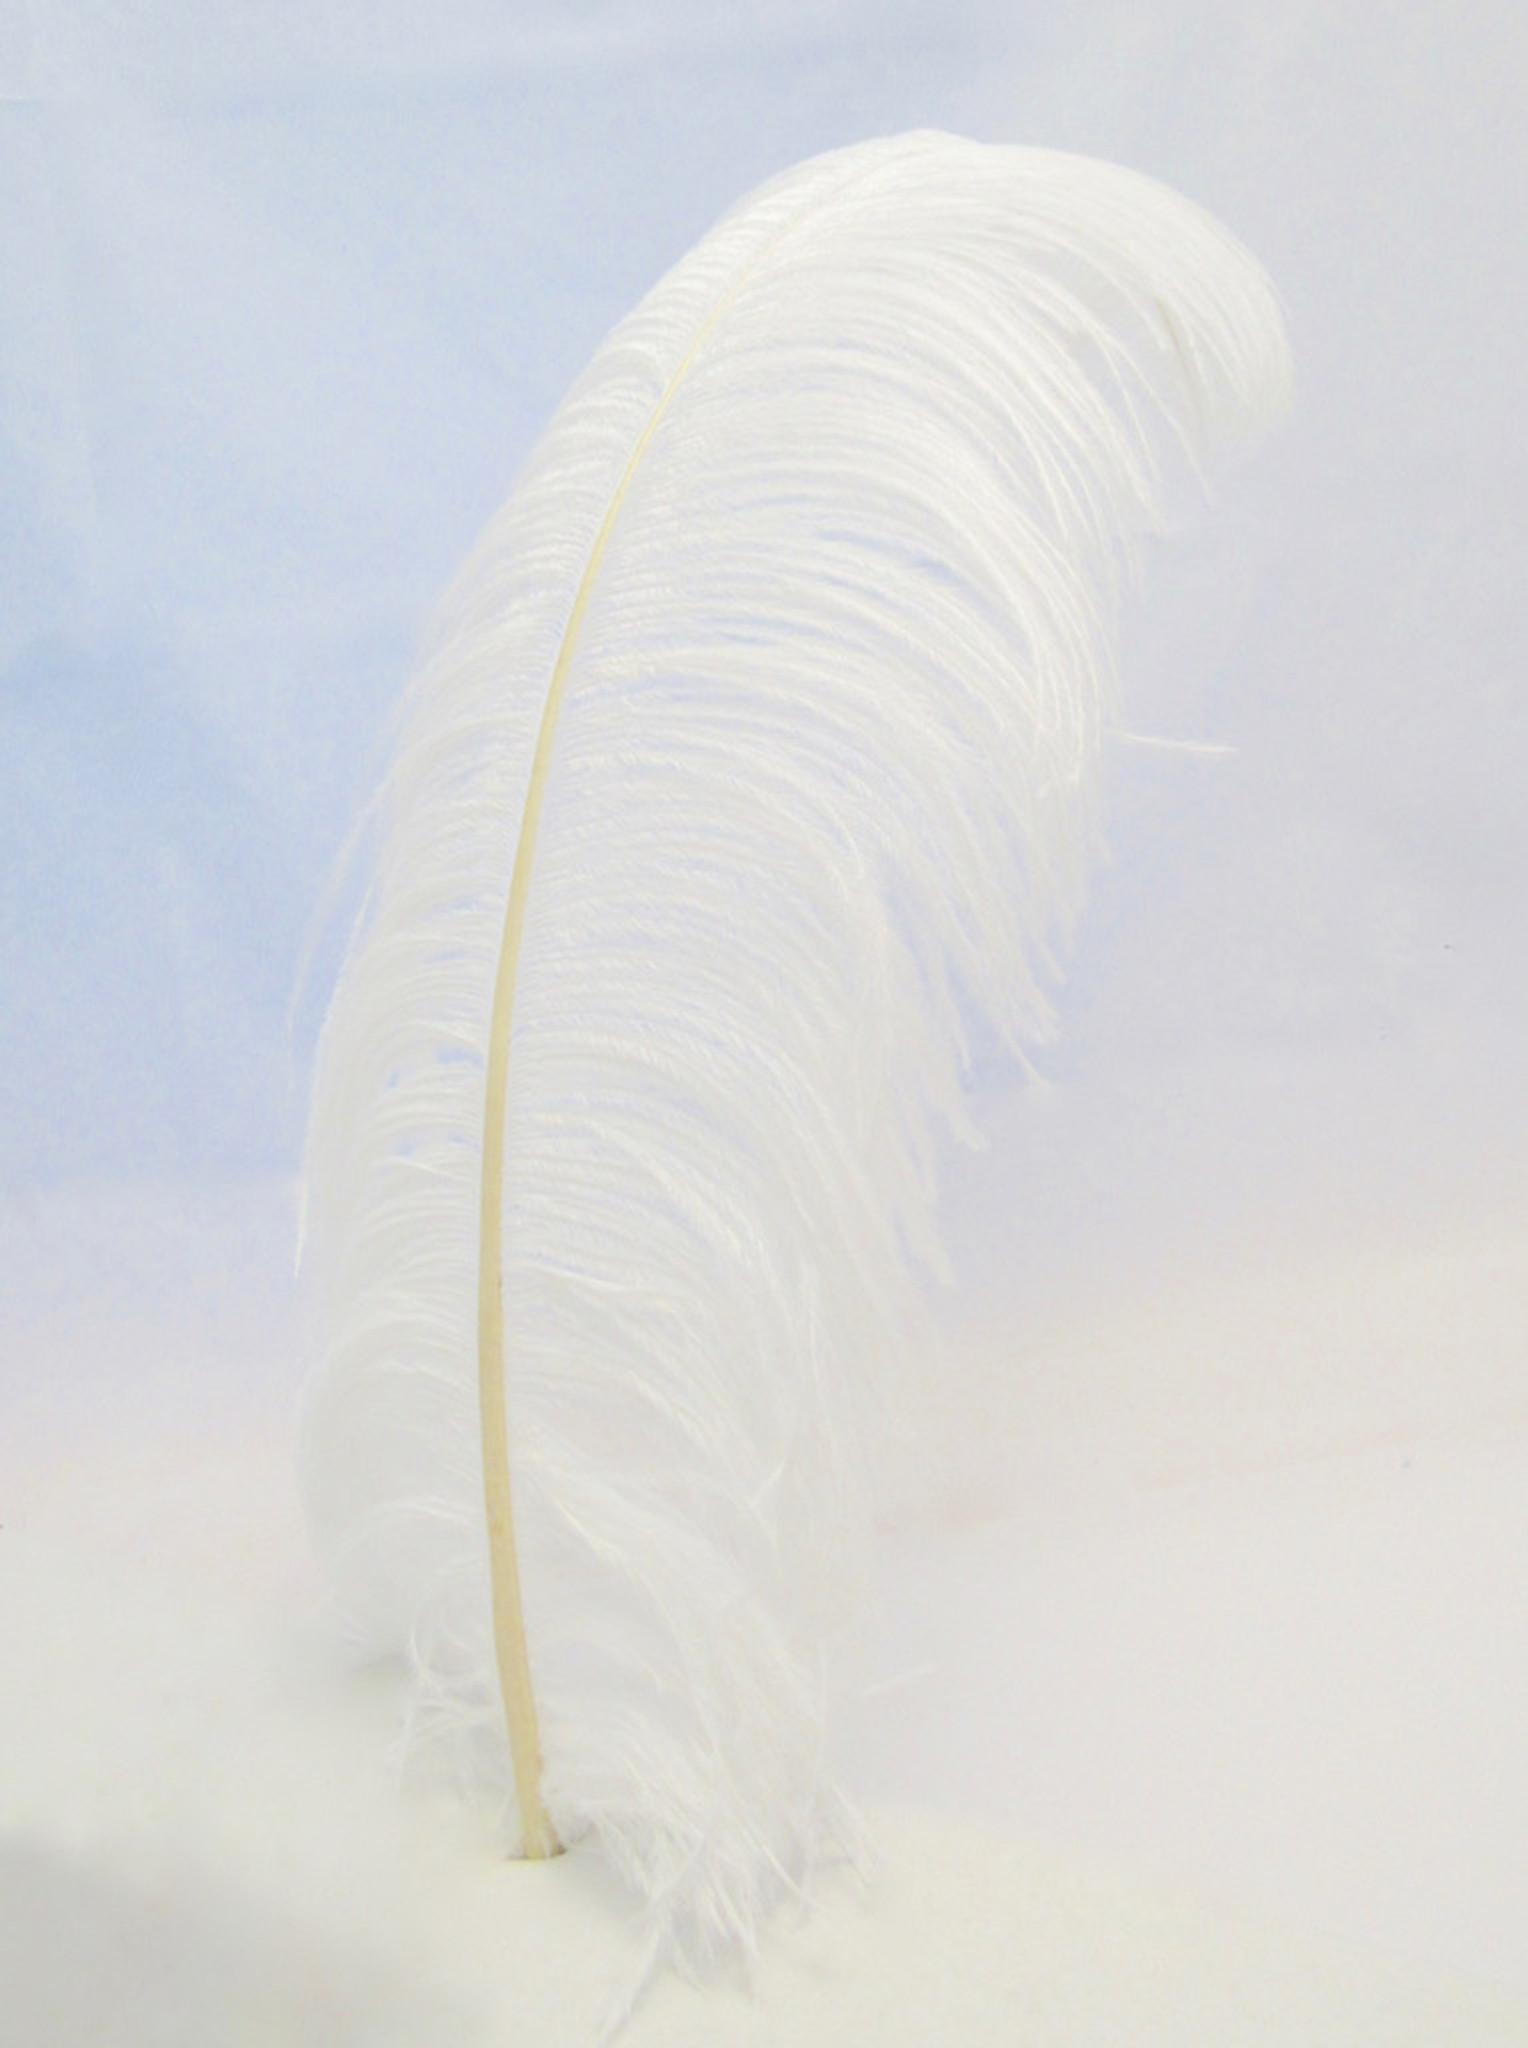 White Ostrich Feather Plume Premium Large 20-24+ inch per Each